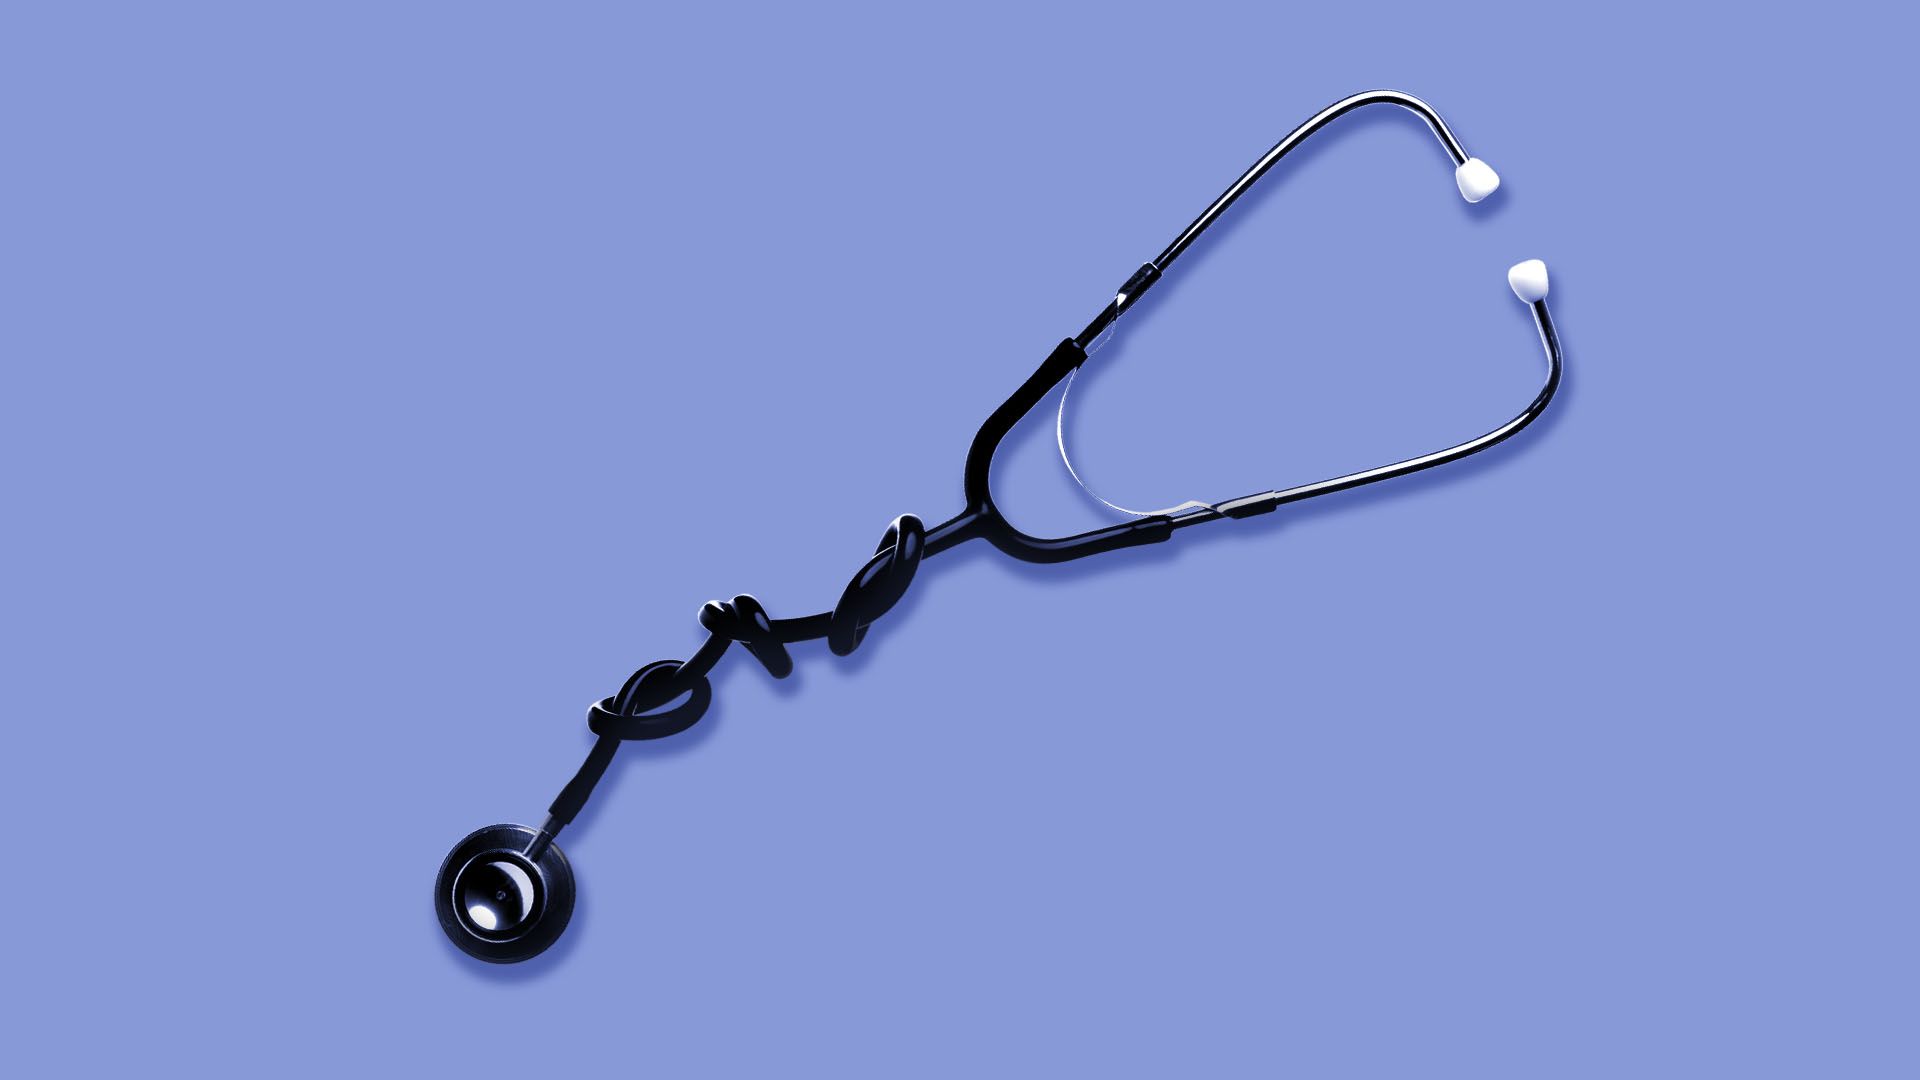 Illustration of a stethoscope with a knot in it.